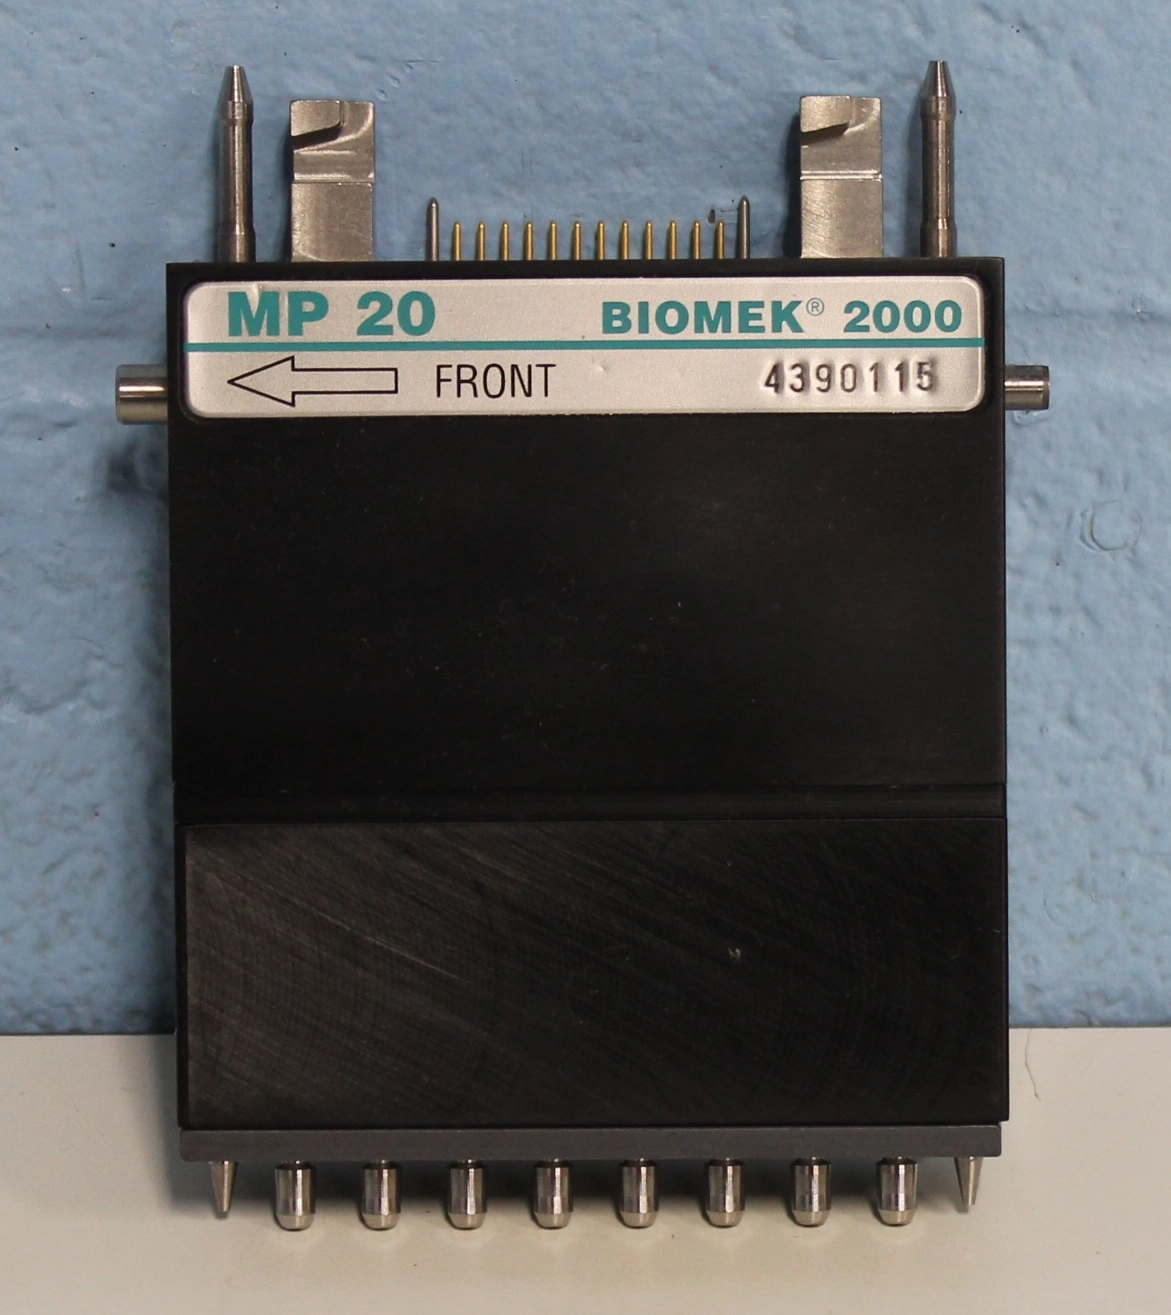 Beckman Coulter MP20 Eight-Tip Tool for the Biomek 2000